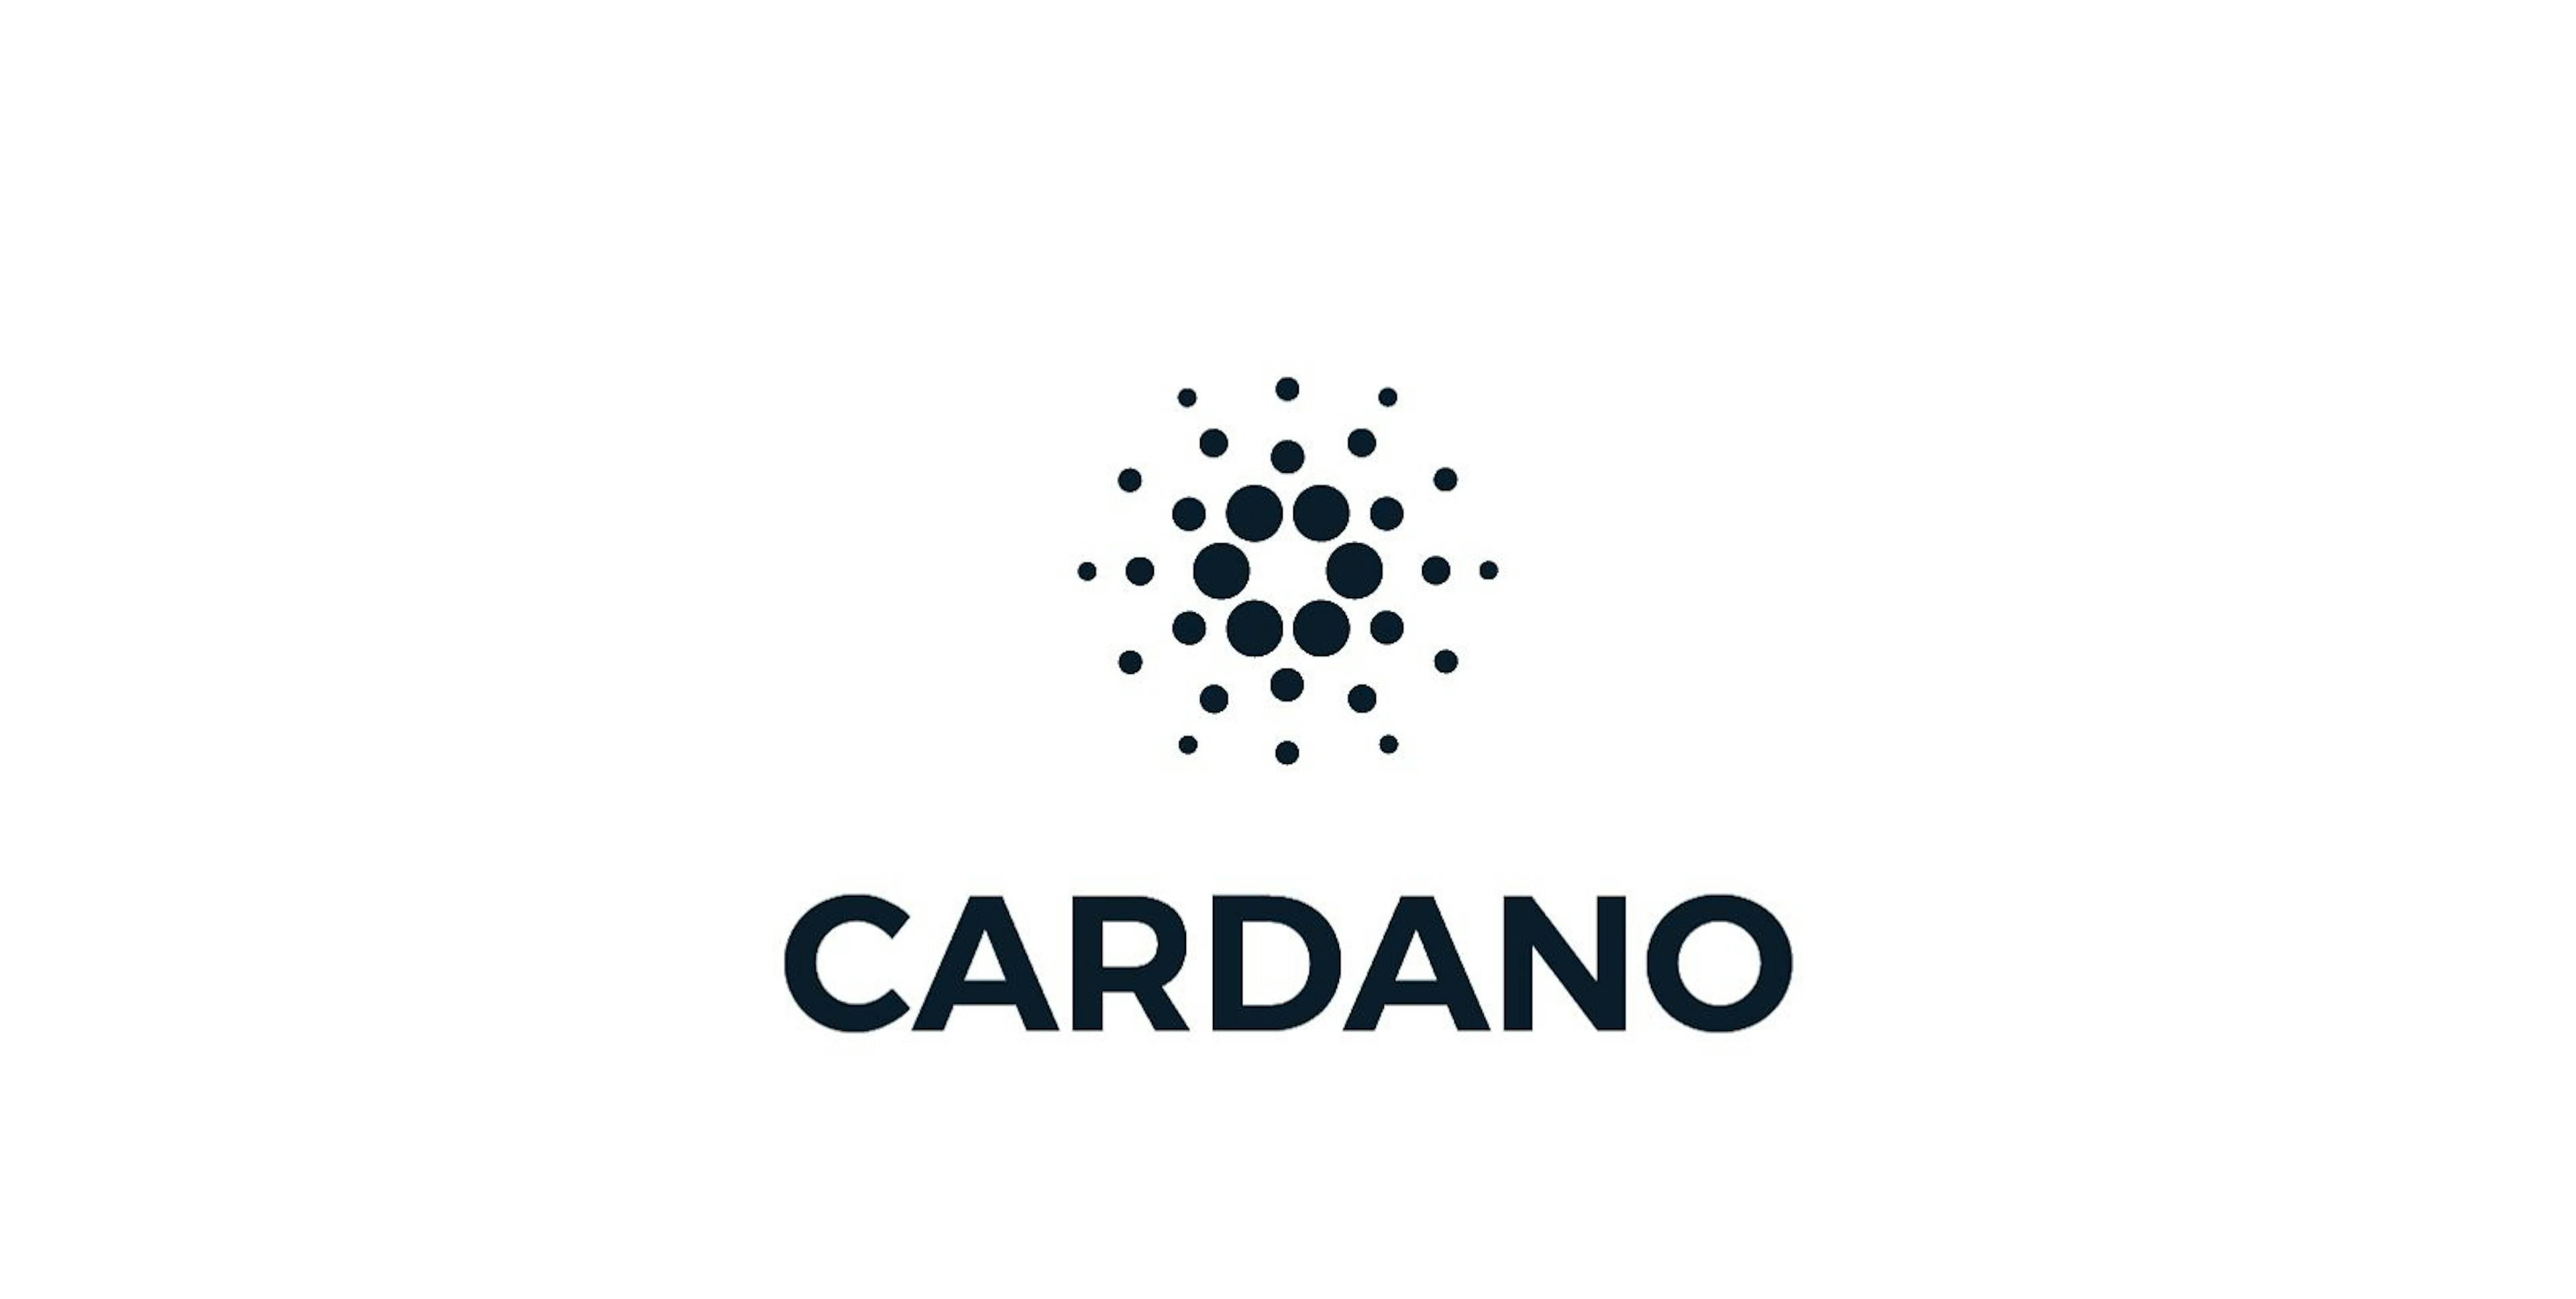 featured image - The Cardano Blockchain Review